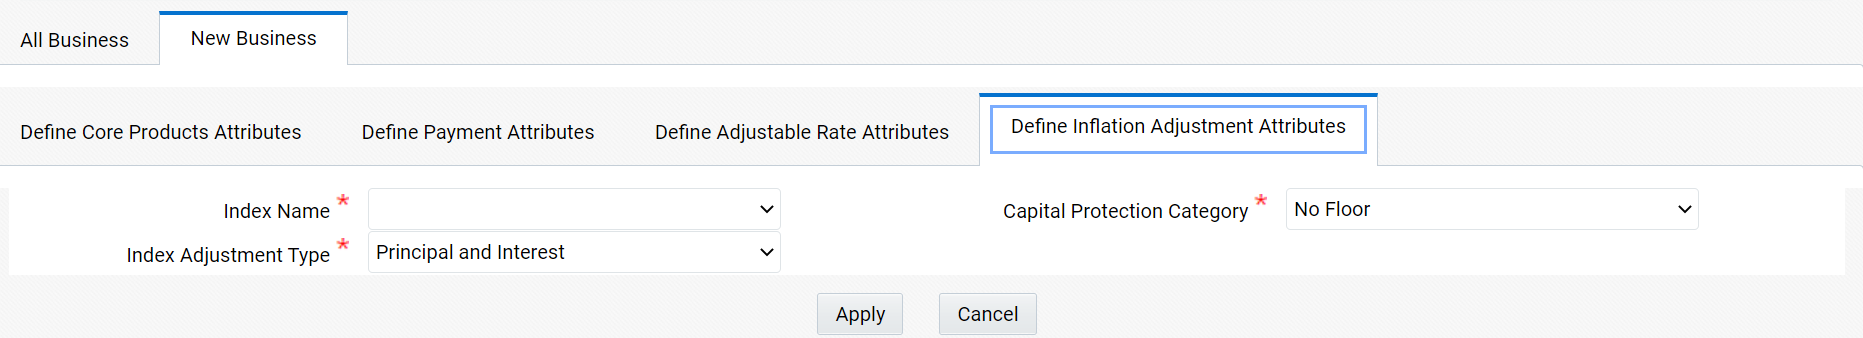 Define Inflation Adjustment Attributes secondary tab to define the Product Characteristic Rule